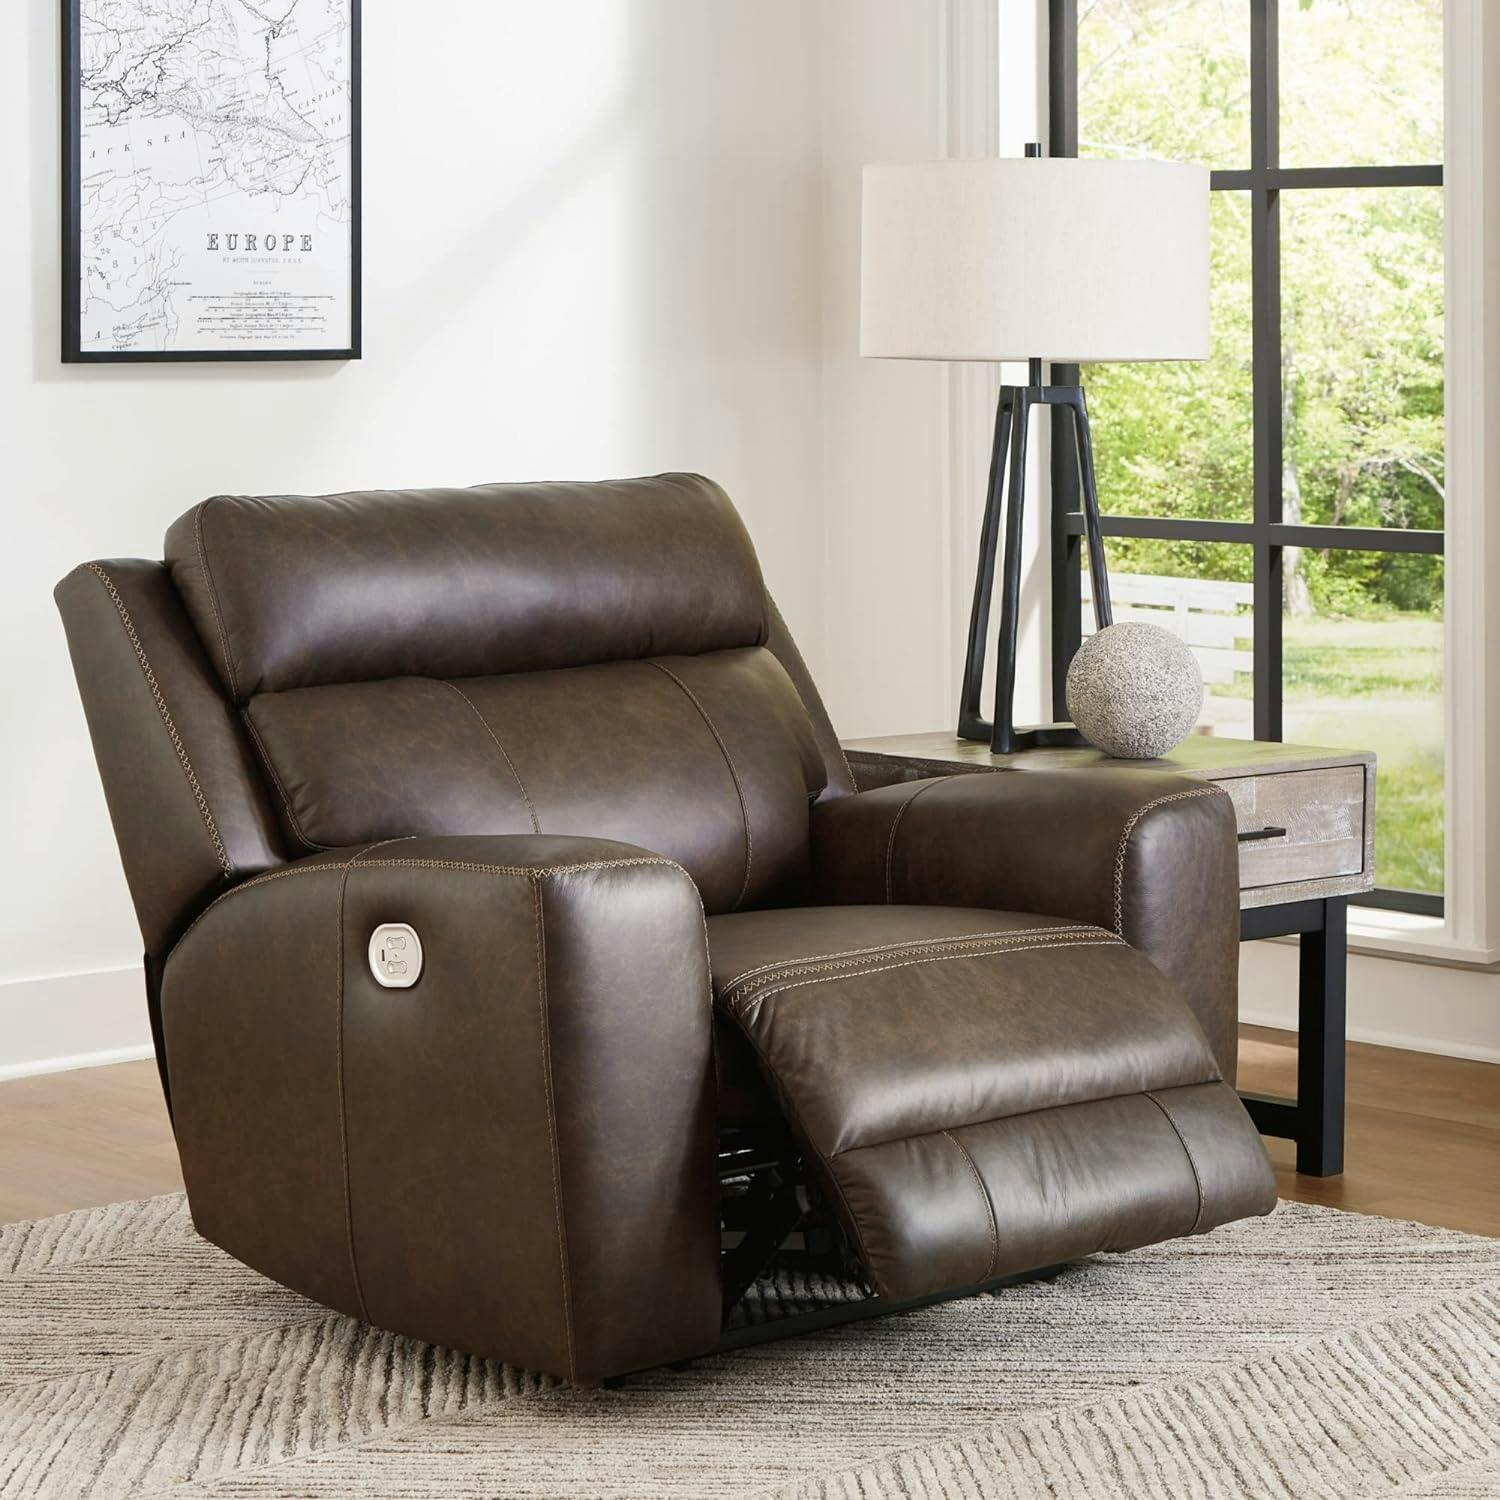 Umber Contemporary 49" Leather Power Recliner with Adjustable Headrest